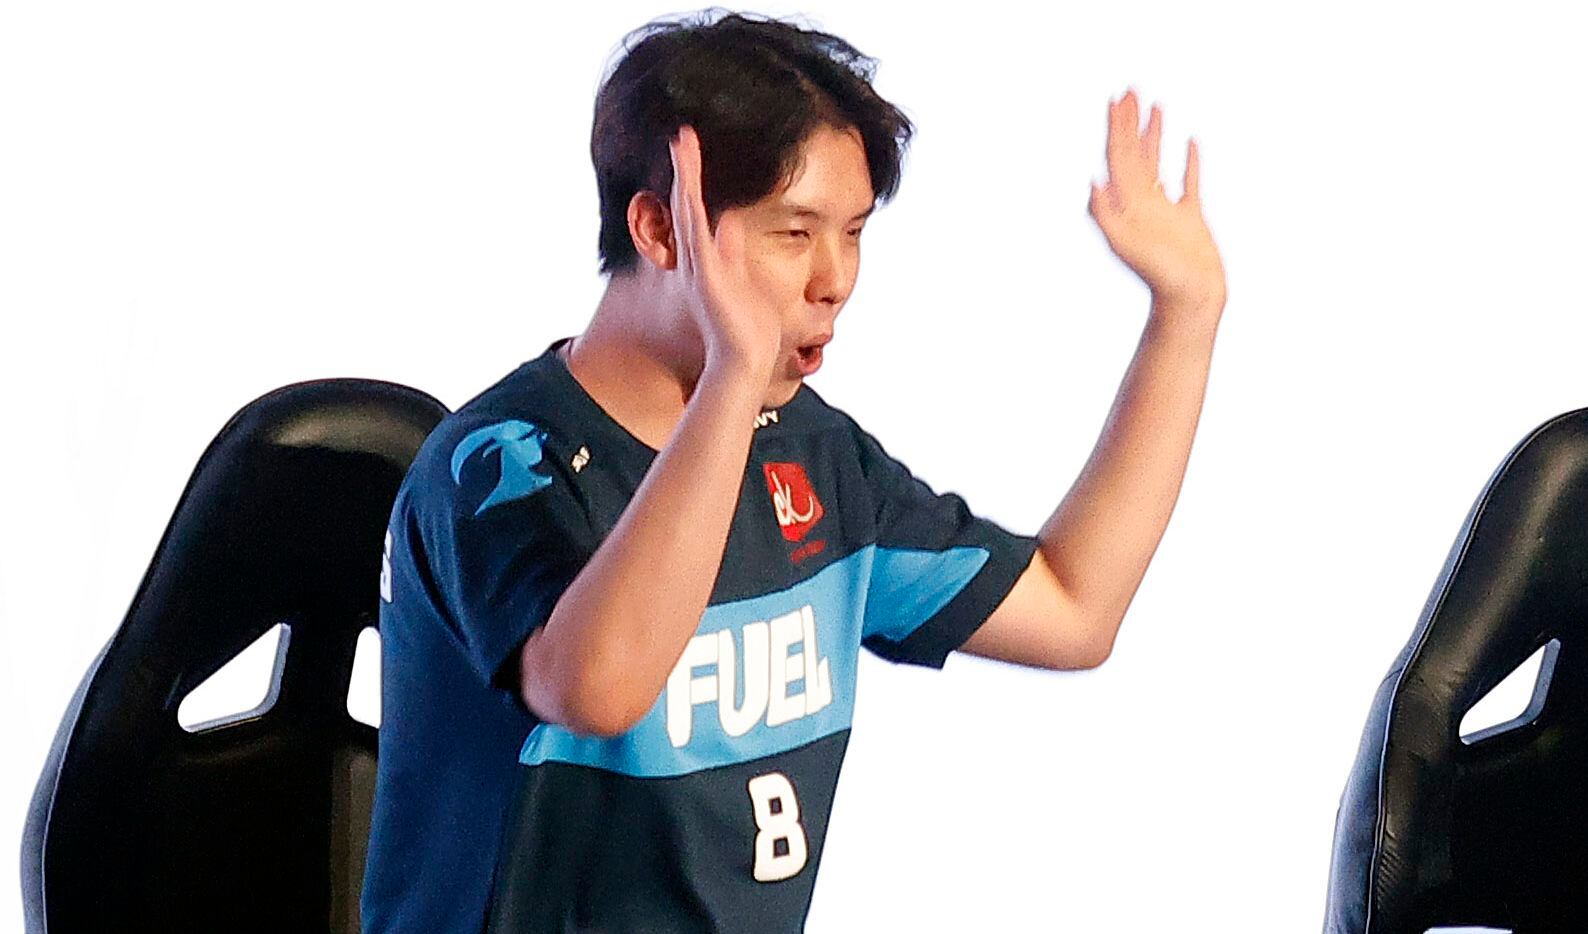 Dallas Fuel player Lee “Fearless” Eui-Seok celebrates after defeating the Houston Outlaws in their Overwatch League game at Esports Stadium Arlington Friday, July 9, 2021. Dallas Fuel defeated Houston in The Battle for Texas, 3-0.